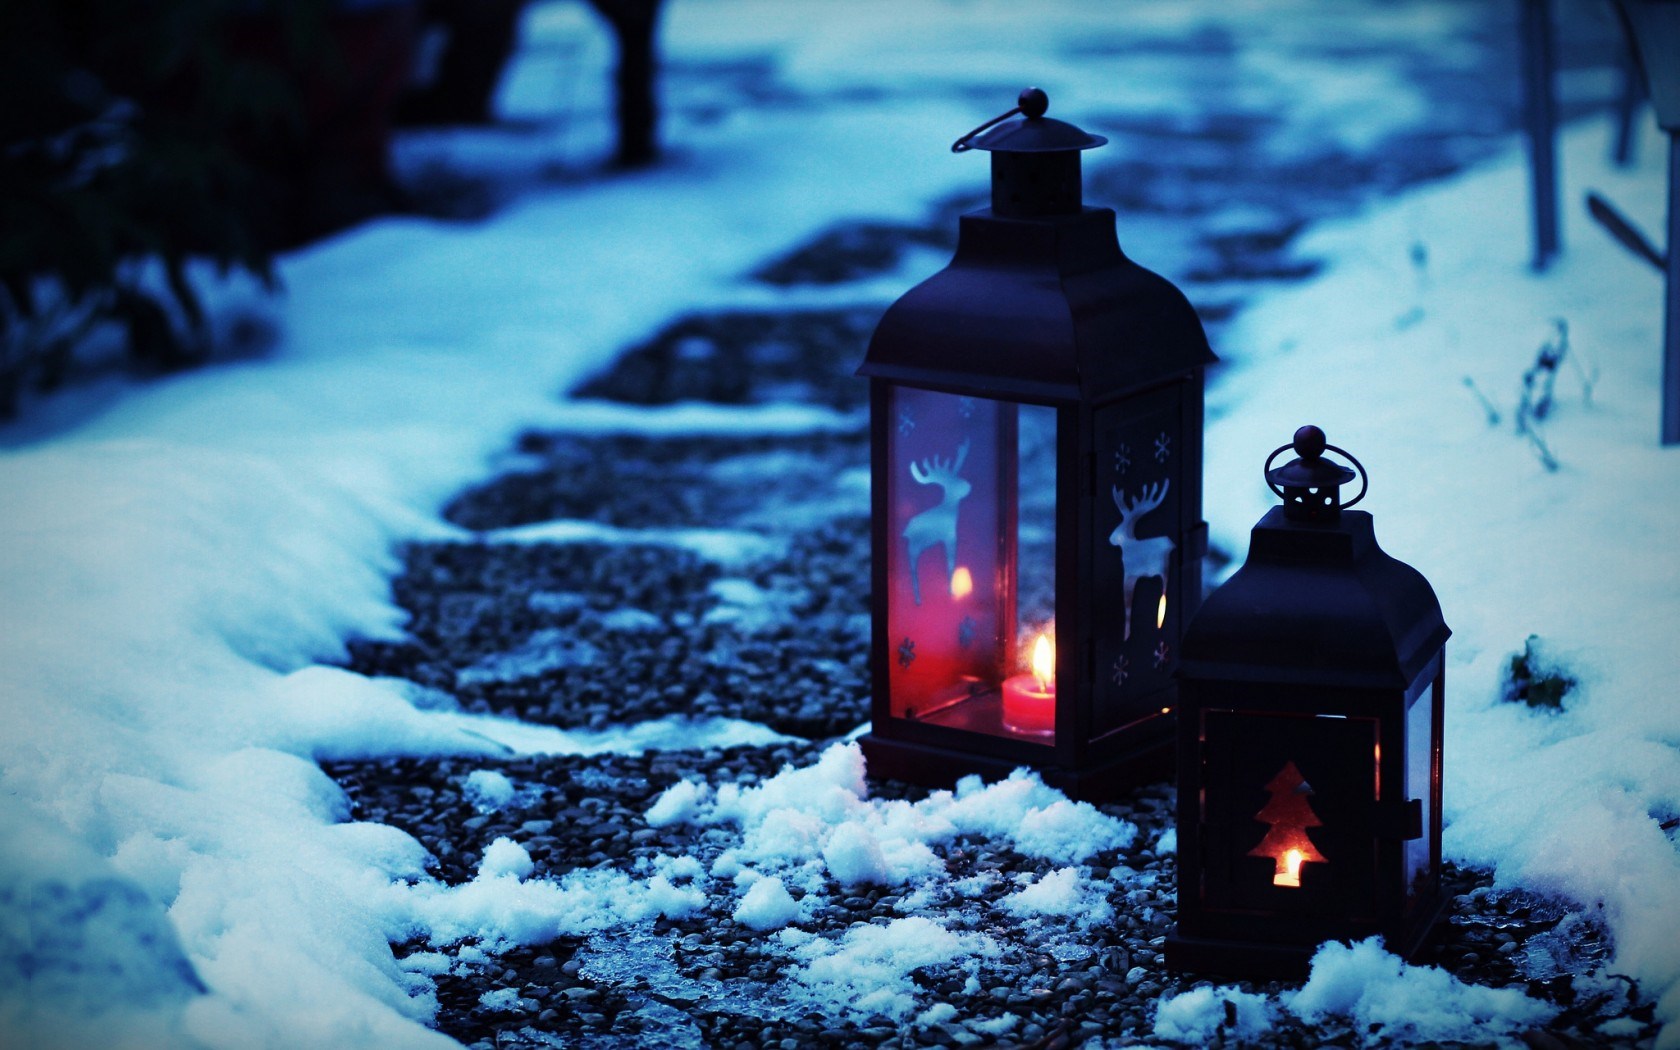 Mood Lantern Flashlight Winter Snowfall HD Wallpaper is a awesome hd photography. Free to upload, share the high definition photos.